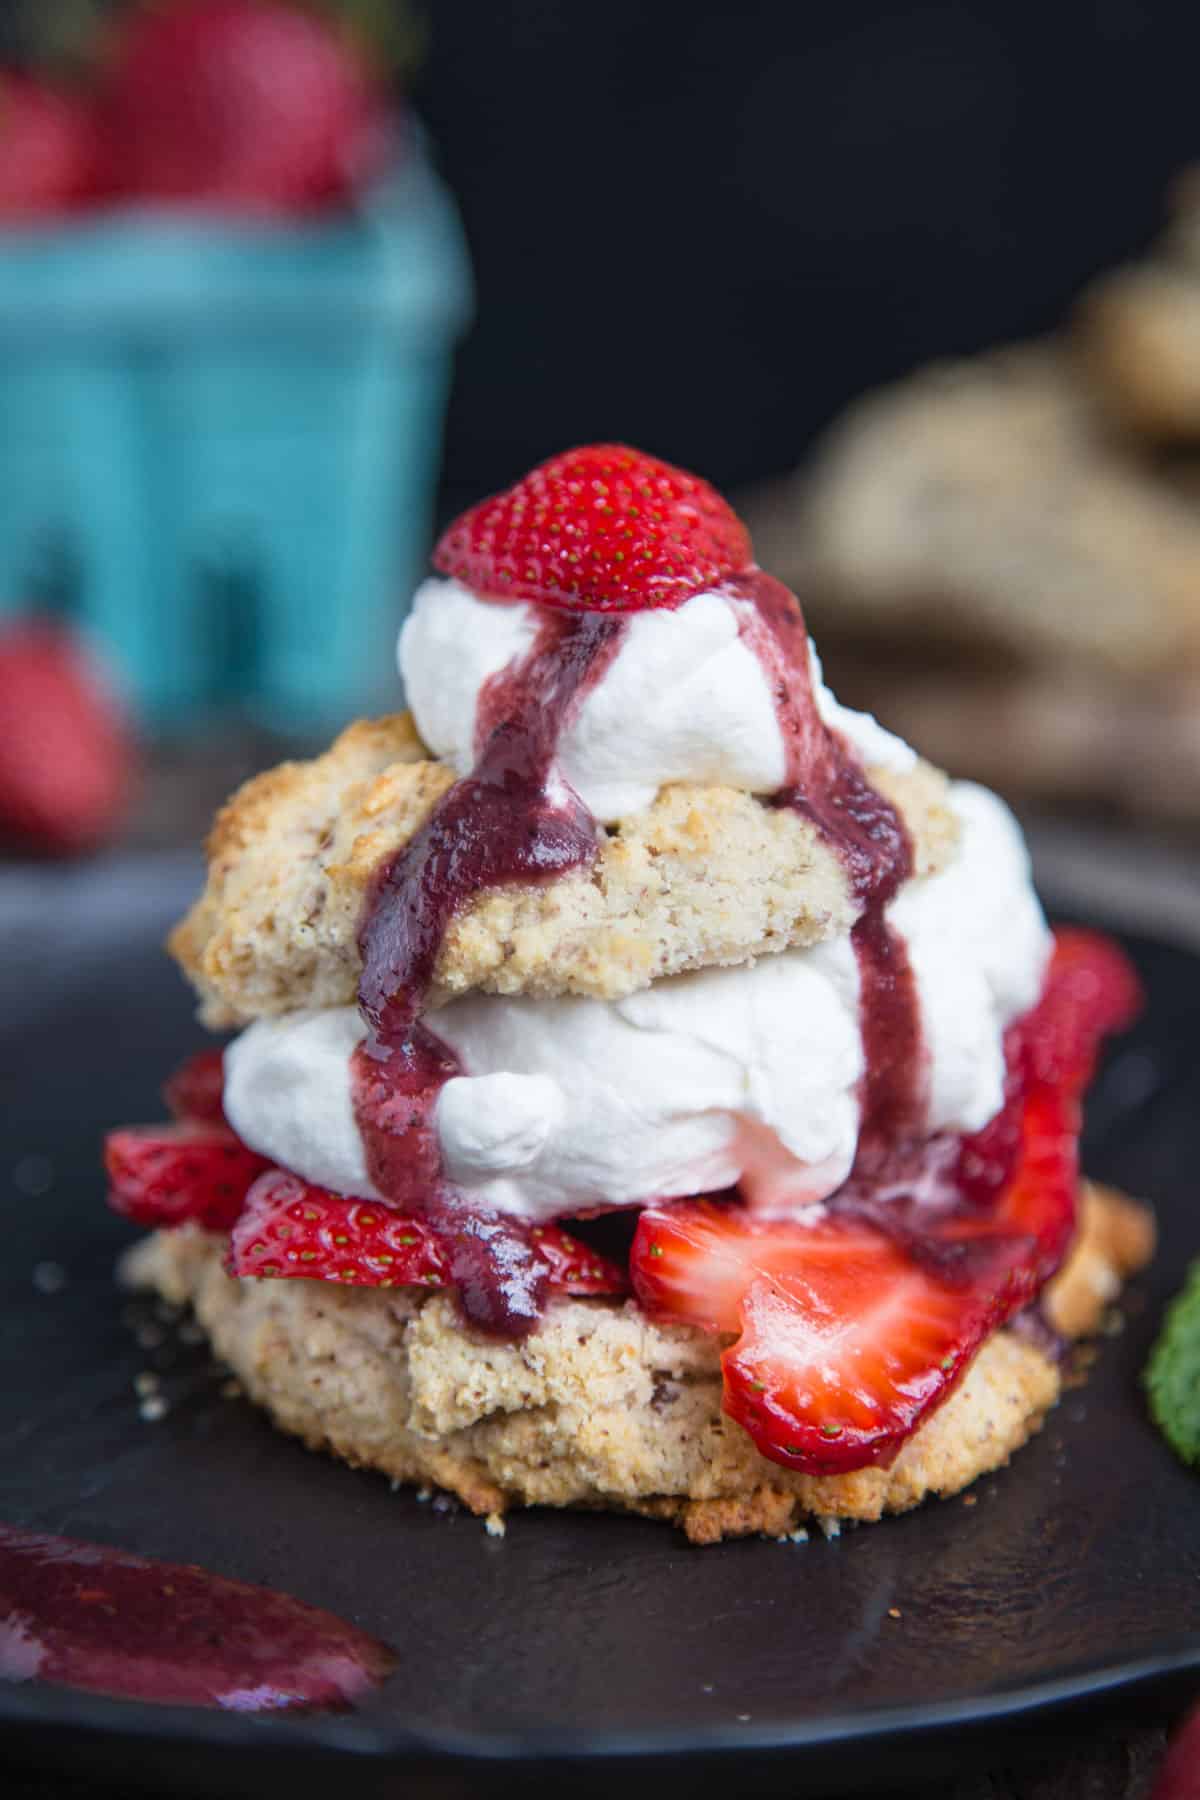 Smoked Strawberry Shortcake on a biscuit topped with whipped cream and smoked strawberry jam